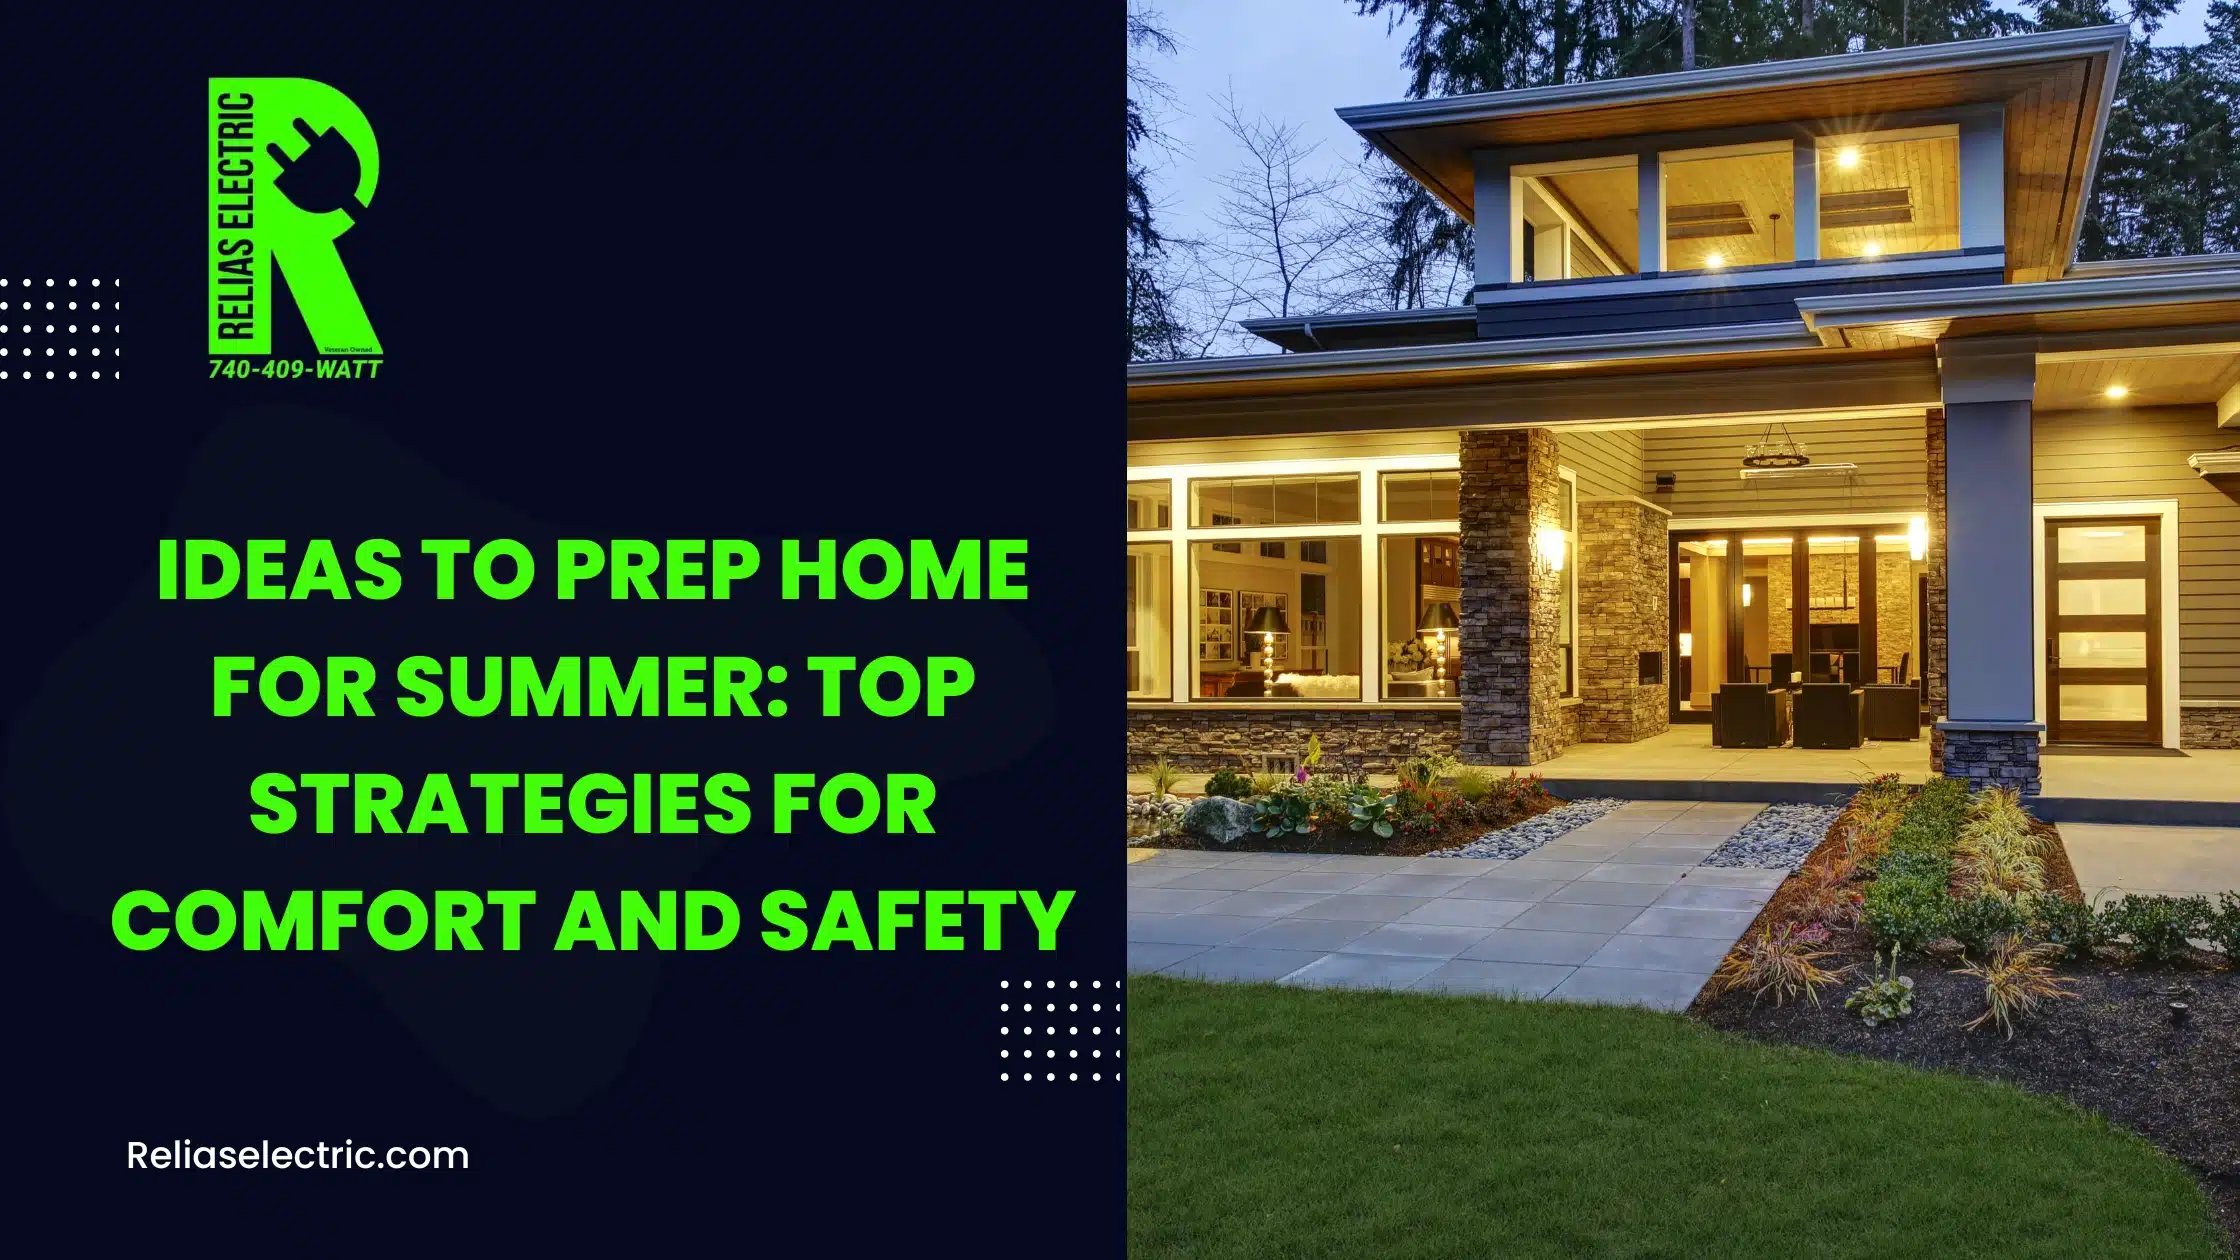 Ideas for to prep home for summer: Top strategies for a comfort and safety